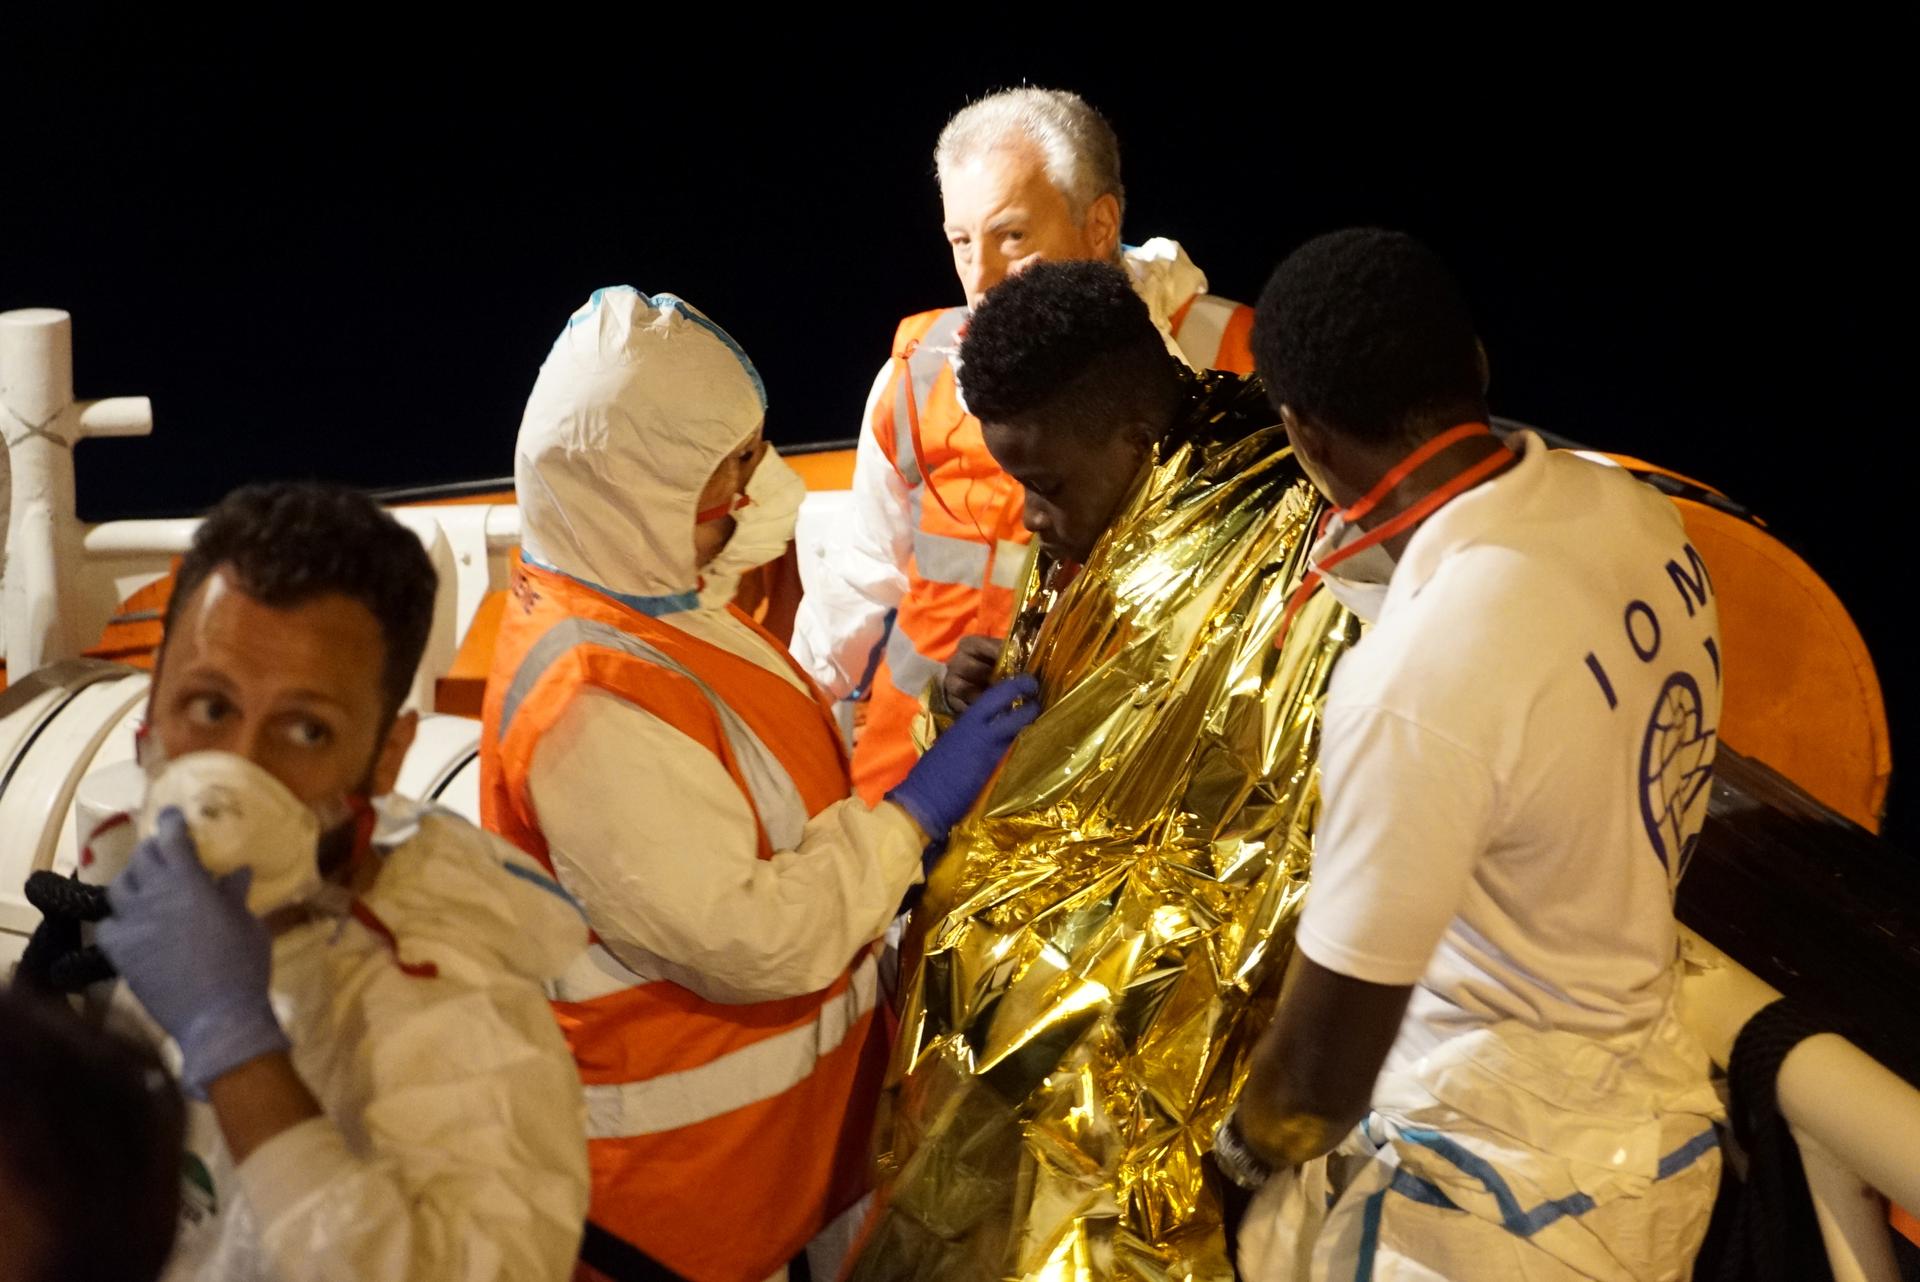 a migrant is rescued at sea